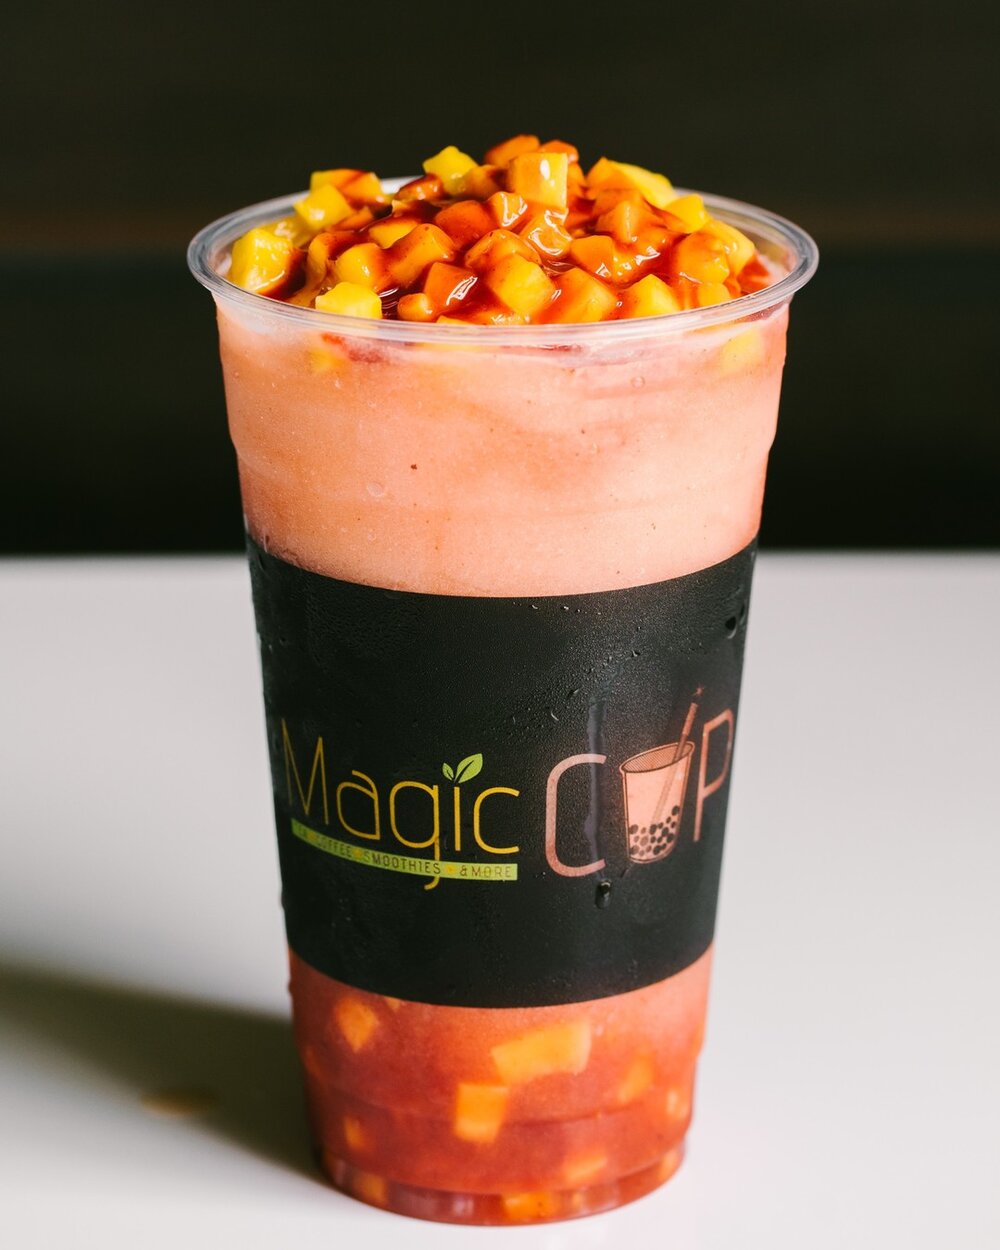 Not that you need a reason to grab a Cha-Guava Smoothie, but&hellip;it&rsquo;s Saturday! 🎉🥳😁

Why not kick your weekend into high gear with a sweet-and-sassy, chili-guava smoothie? 🍈🌶🥤(Oh, and did we mention it comes with a CANDY STRAW? 🍭🍬😱)

Swing by your nearest MCC for safe, simple pickup anytime today. 😷🥰 

(We&rsquo;re open until 11pm!)